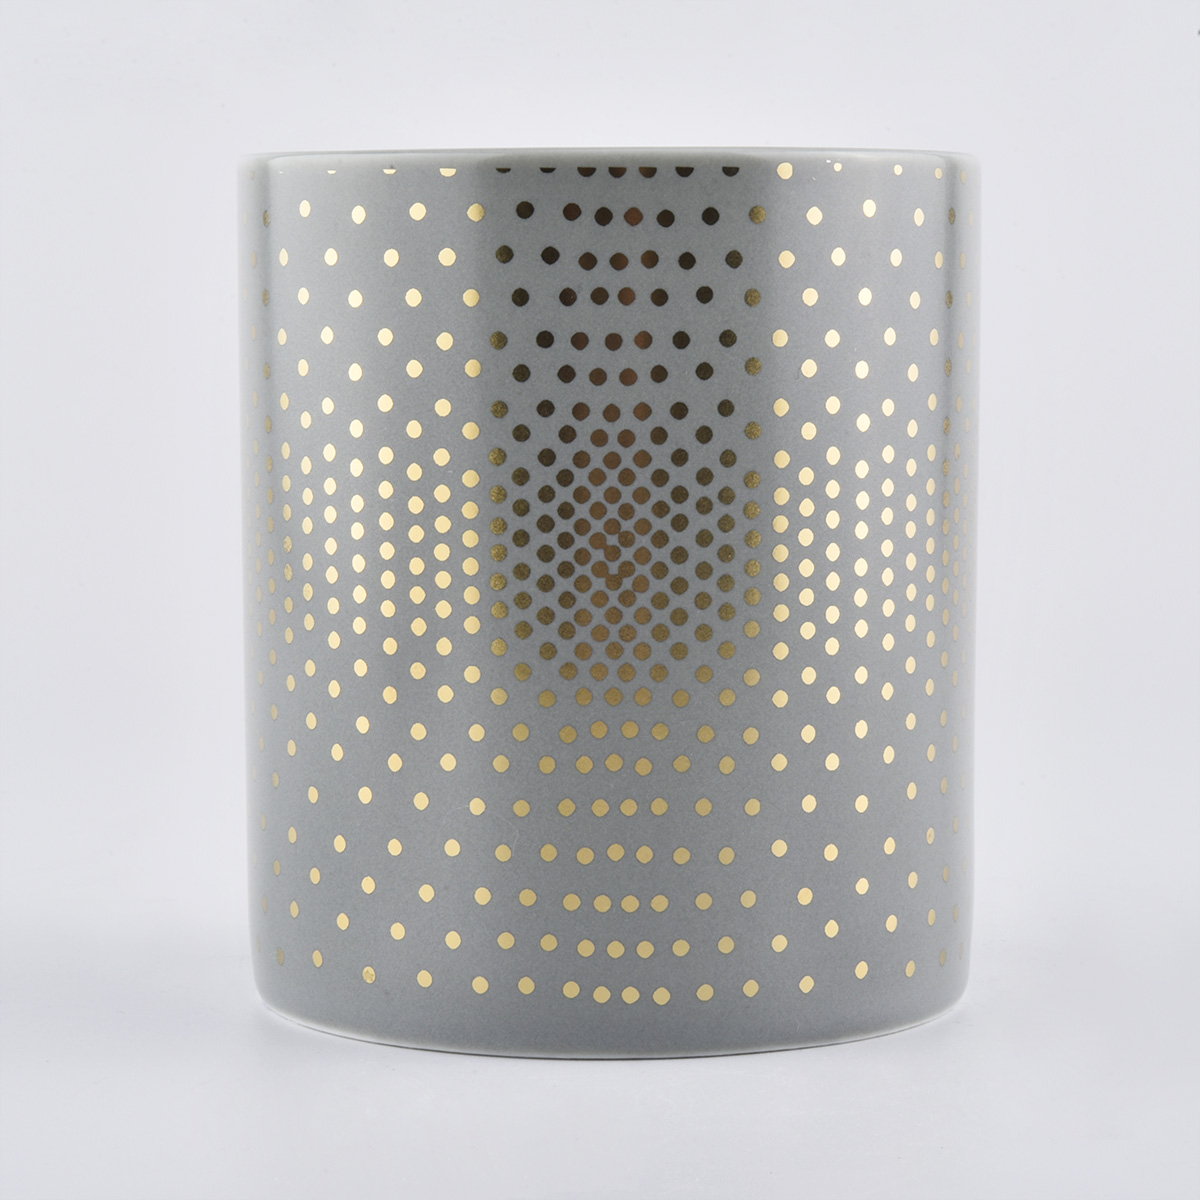 Cylinder ceramic candle container with gold prints, unique ceramic candle holder